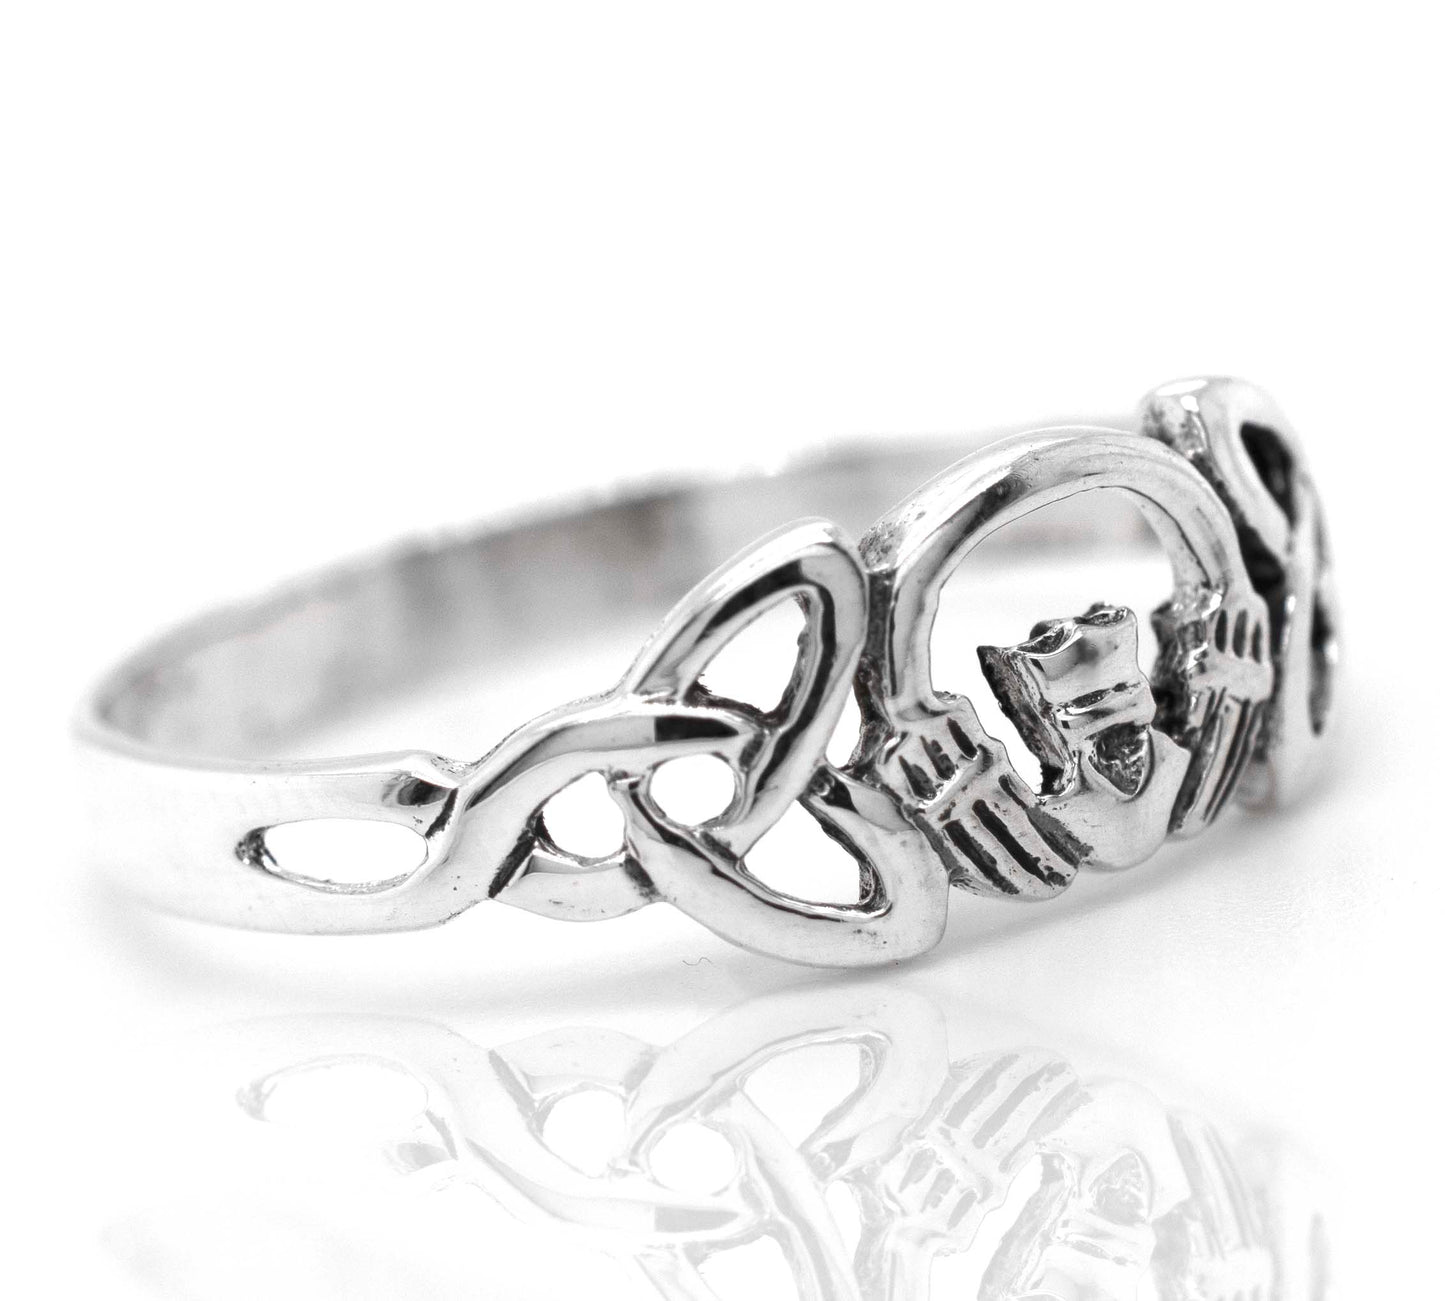 This sterling silver Claddagh Ring With Trinity Knot embodies the essence of love and Celtic culture. Suitable for engagement or as a meaningful gift, it showcases beautiful craftsmanship.